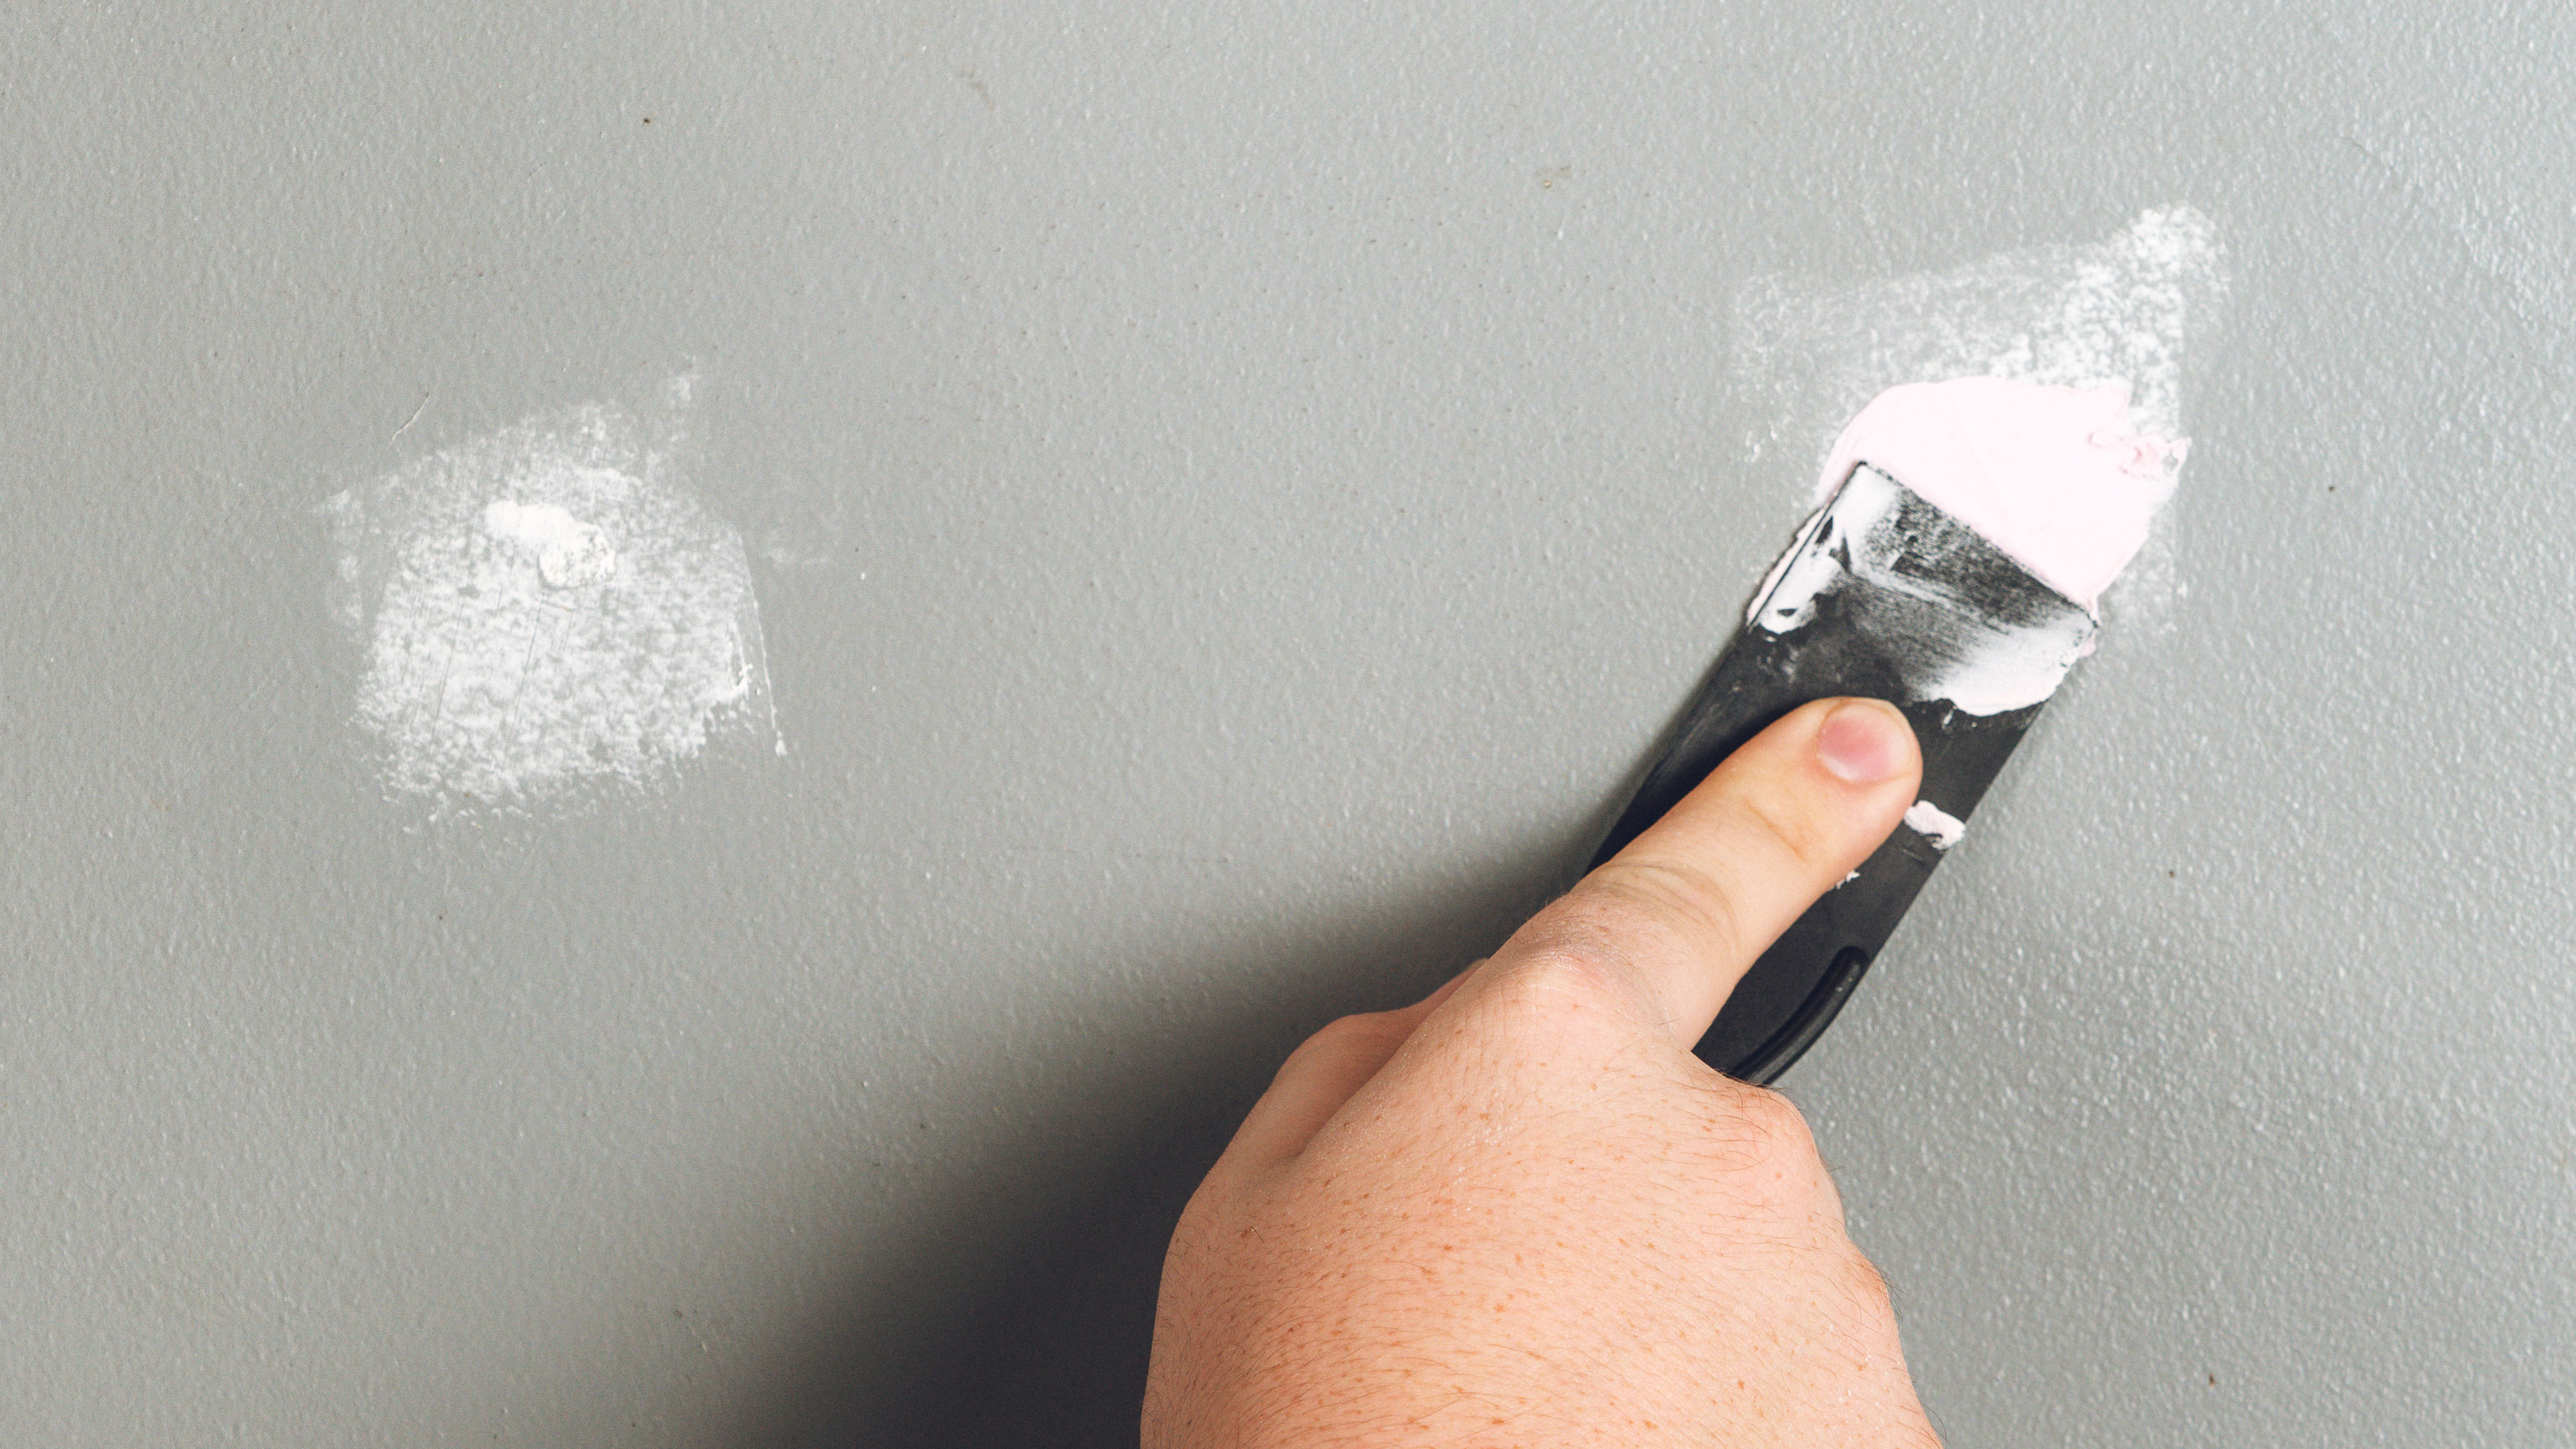 DIY Nail Hole Filler for Painted Walls - wide 7